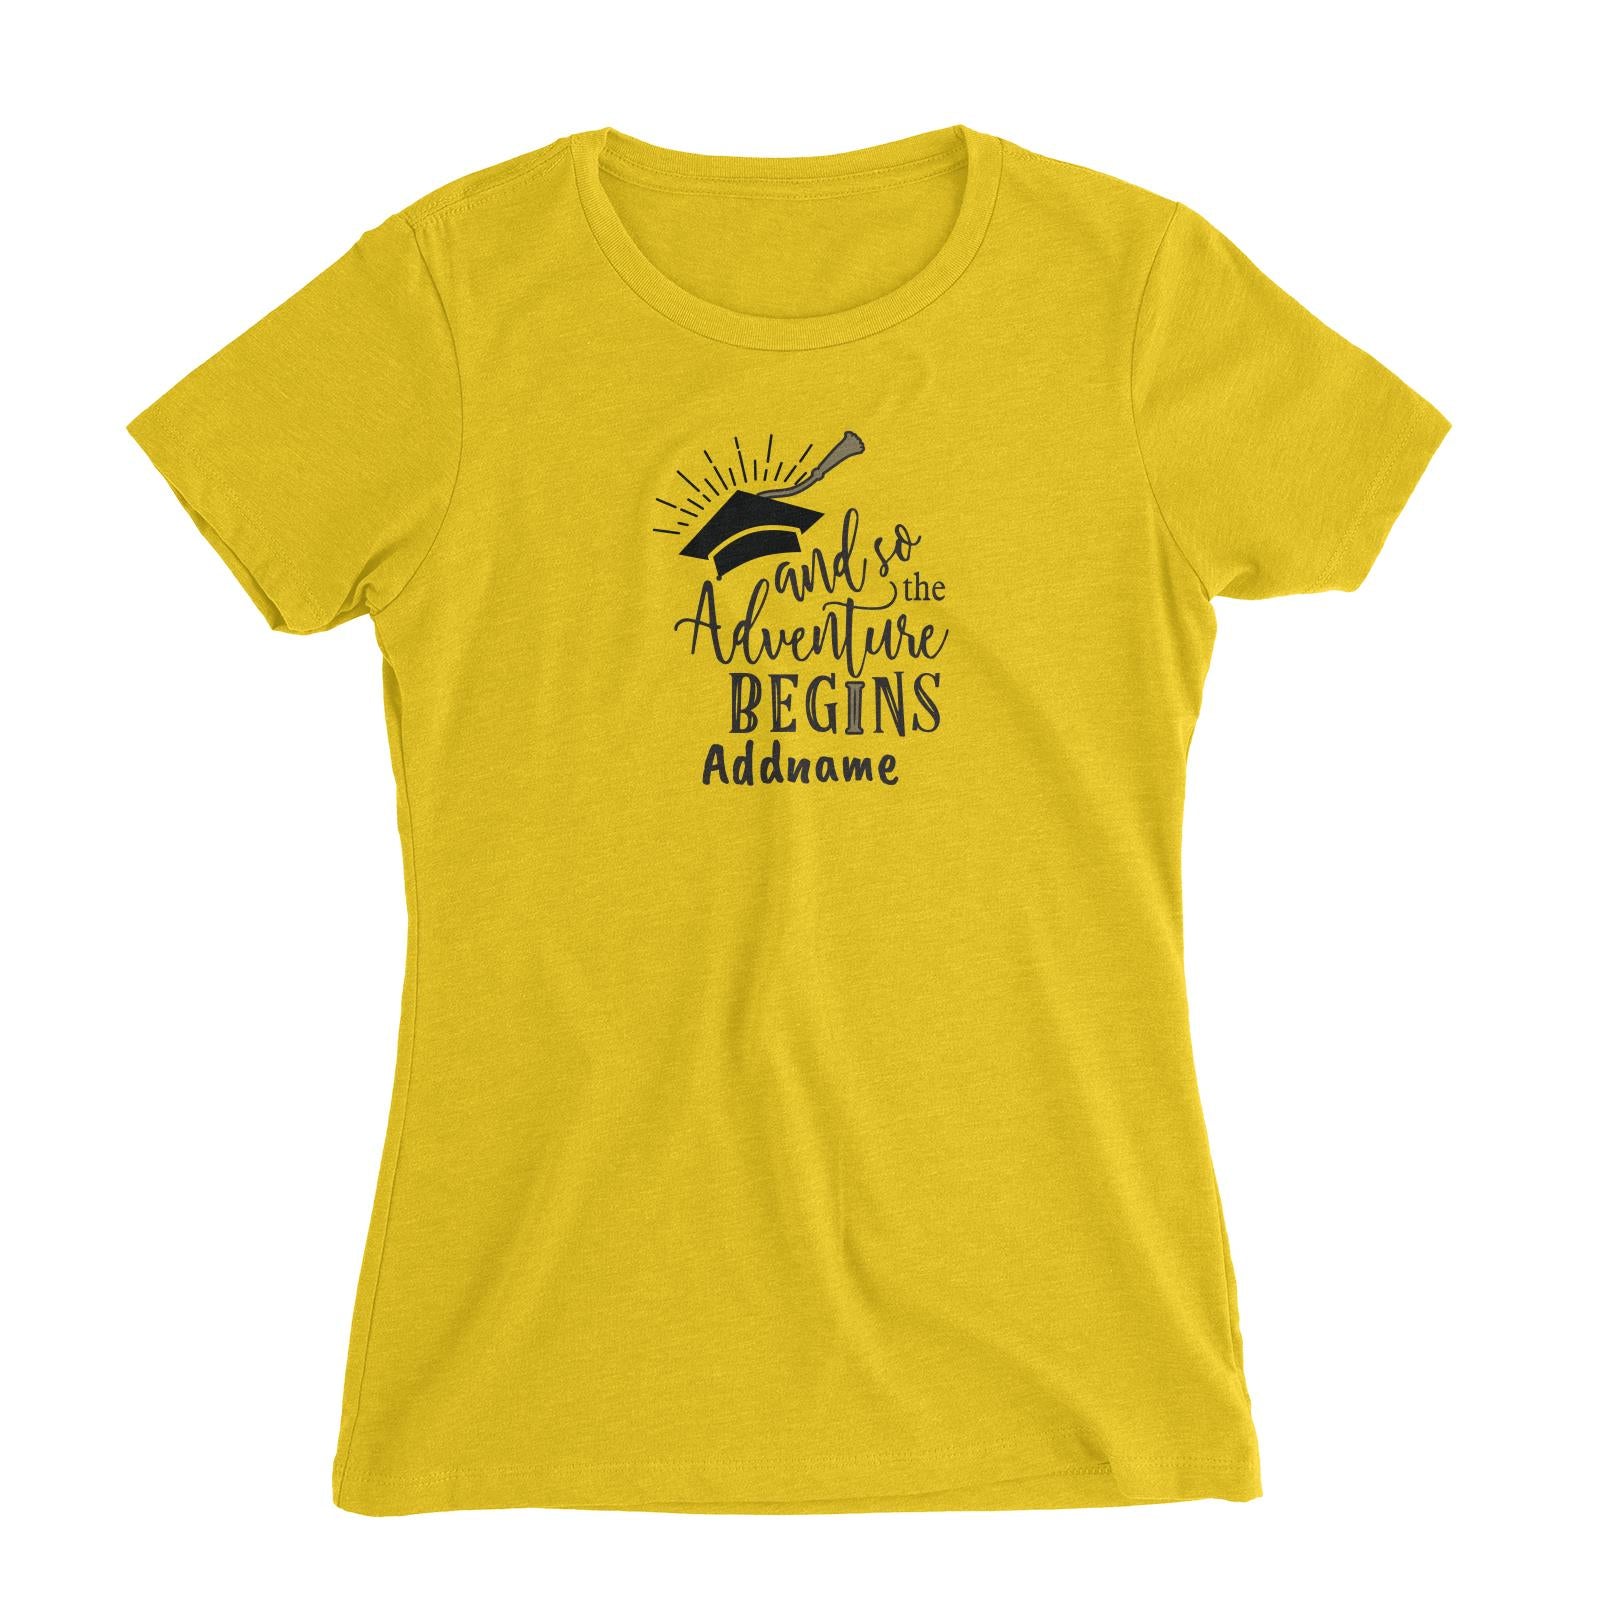 Graduation Series And So The Adventure Begins Women's Slim Fit T-Shirt